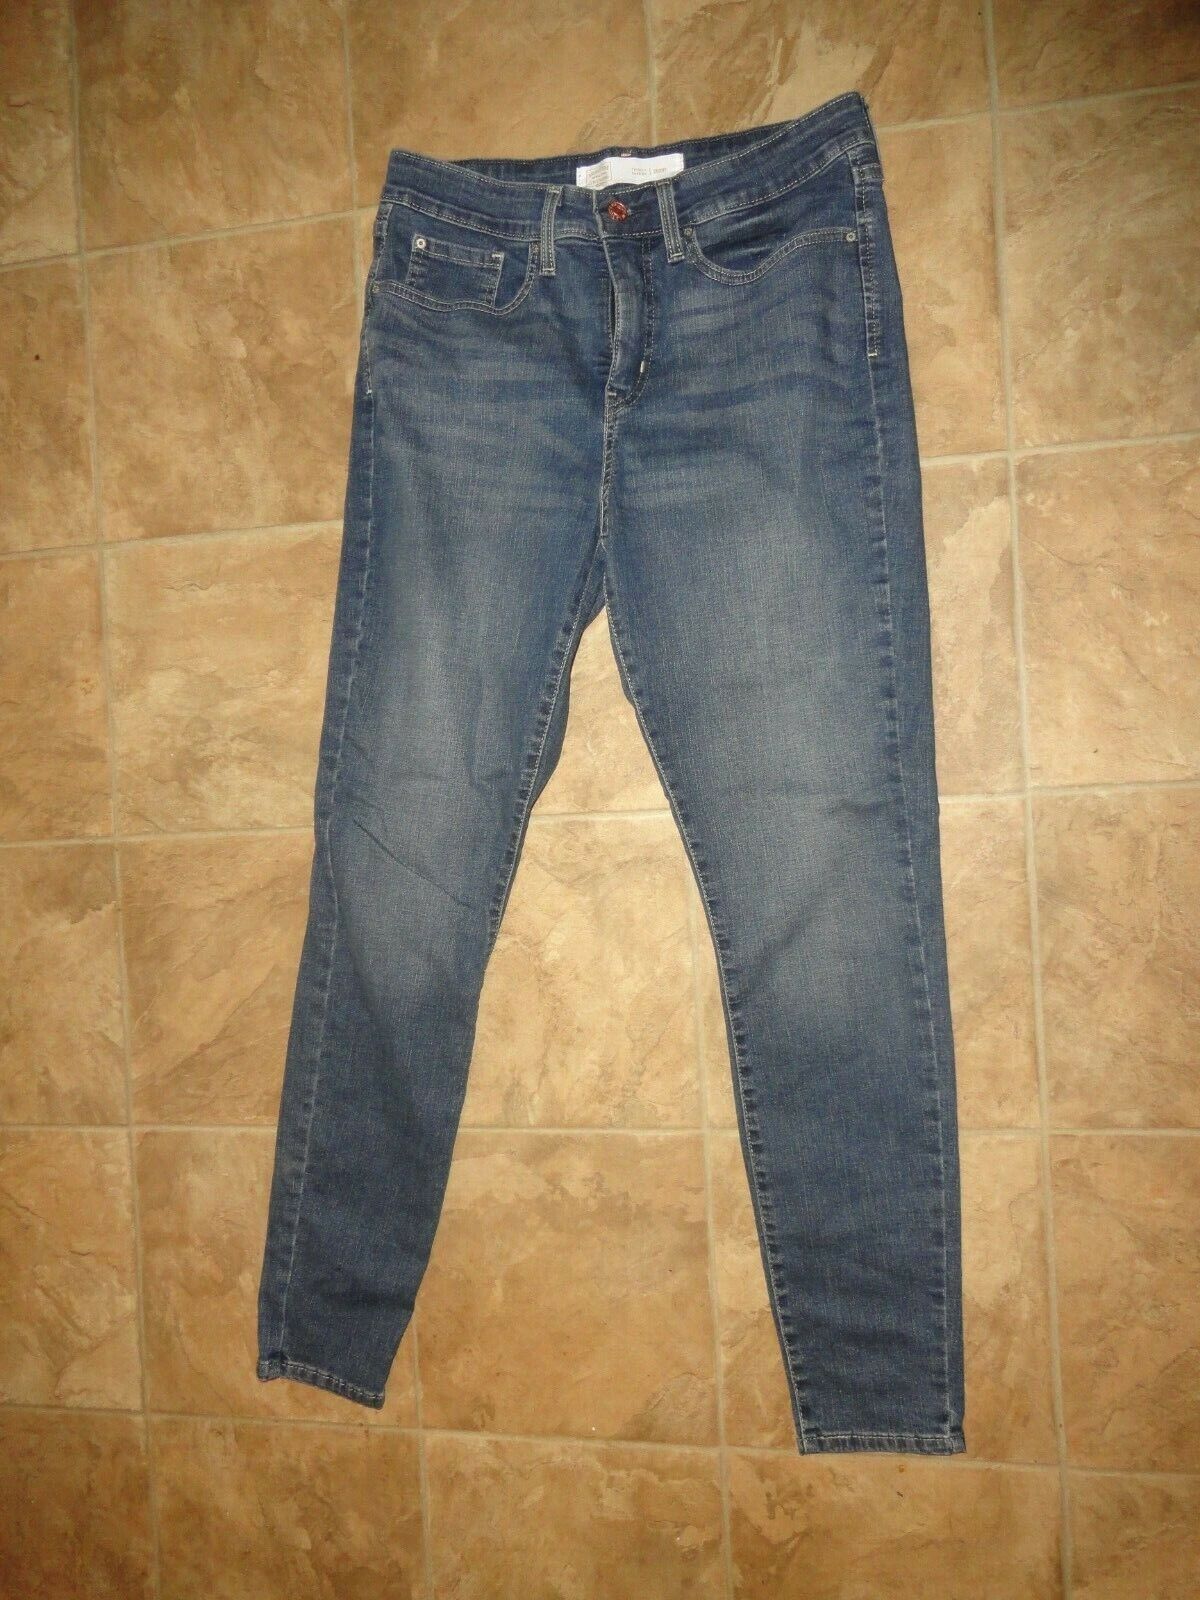 Women's Signature Levi Strauss Totally Shaping Skinny Jeans Size 8-10?  30x28 | eBay